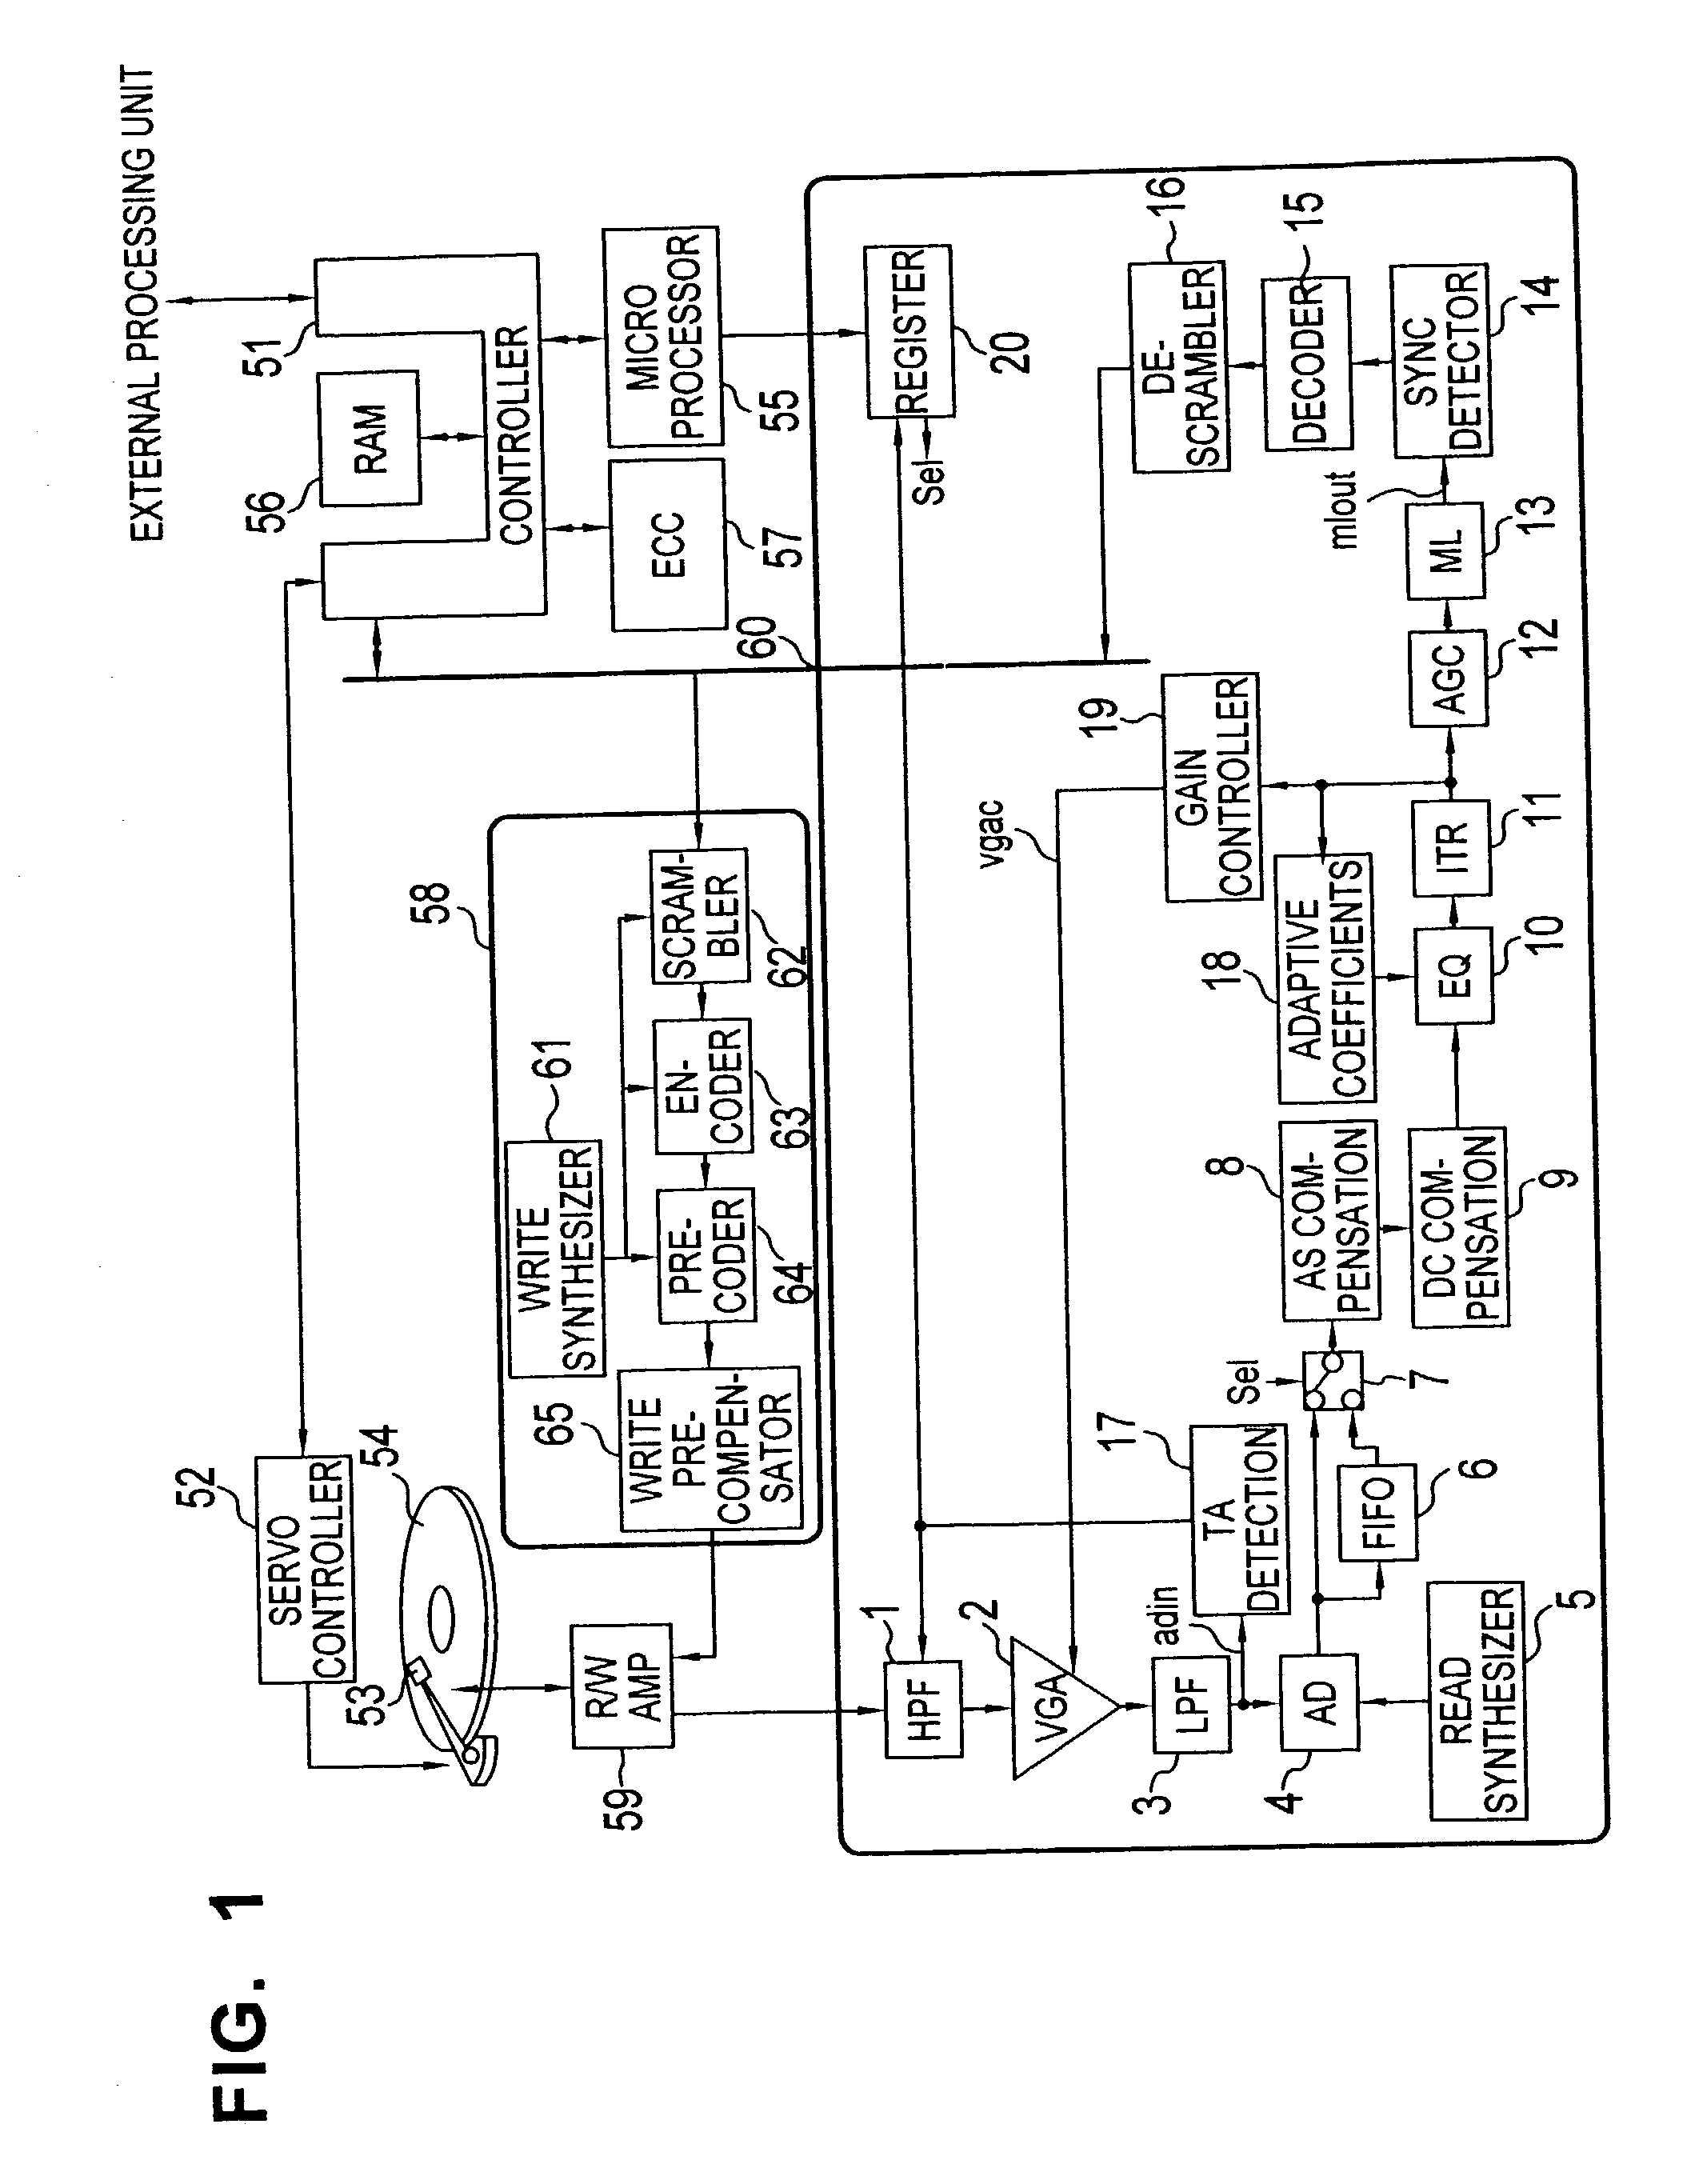 Signal processing apparatus and a data recording and reproducing apparatus including local memory processor